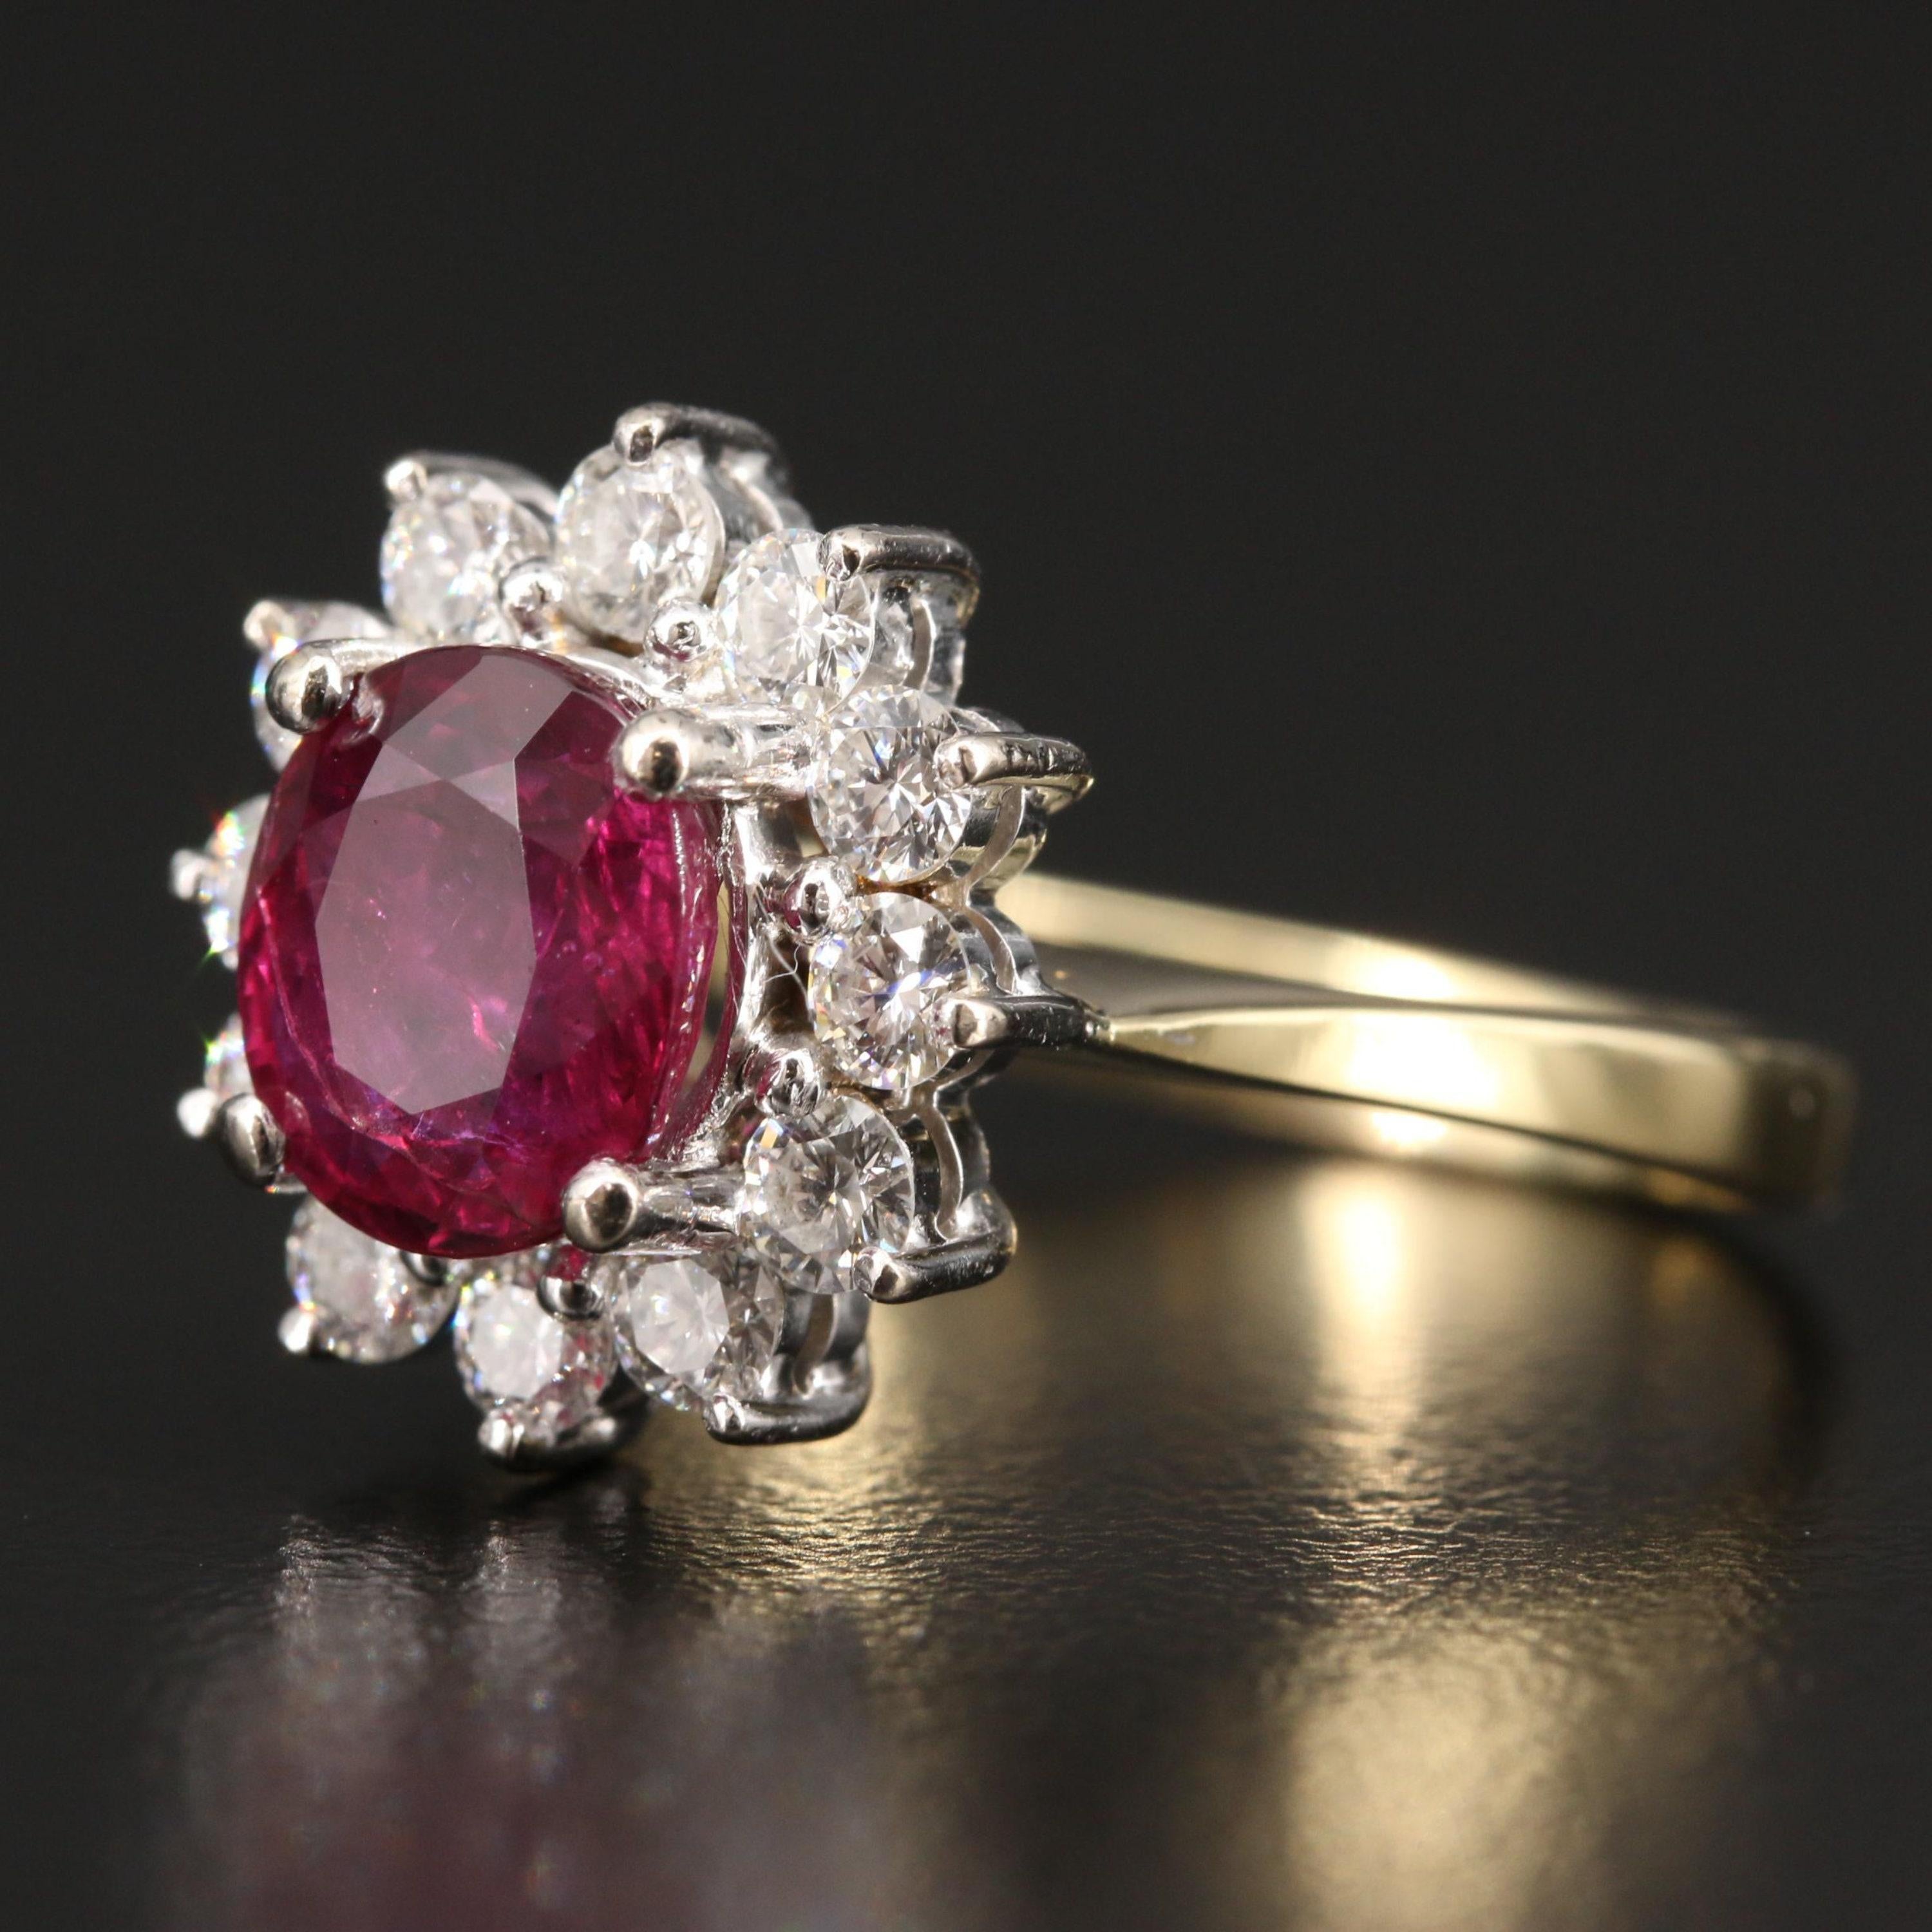 For Sale:  Certified 1.19 Carat Ruby Diamond Engagement Ring Floral Halo Ruby Bridal Ring 2